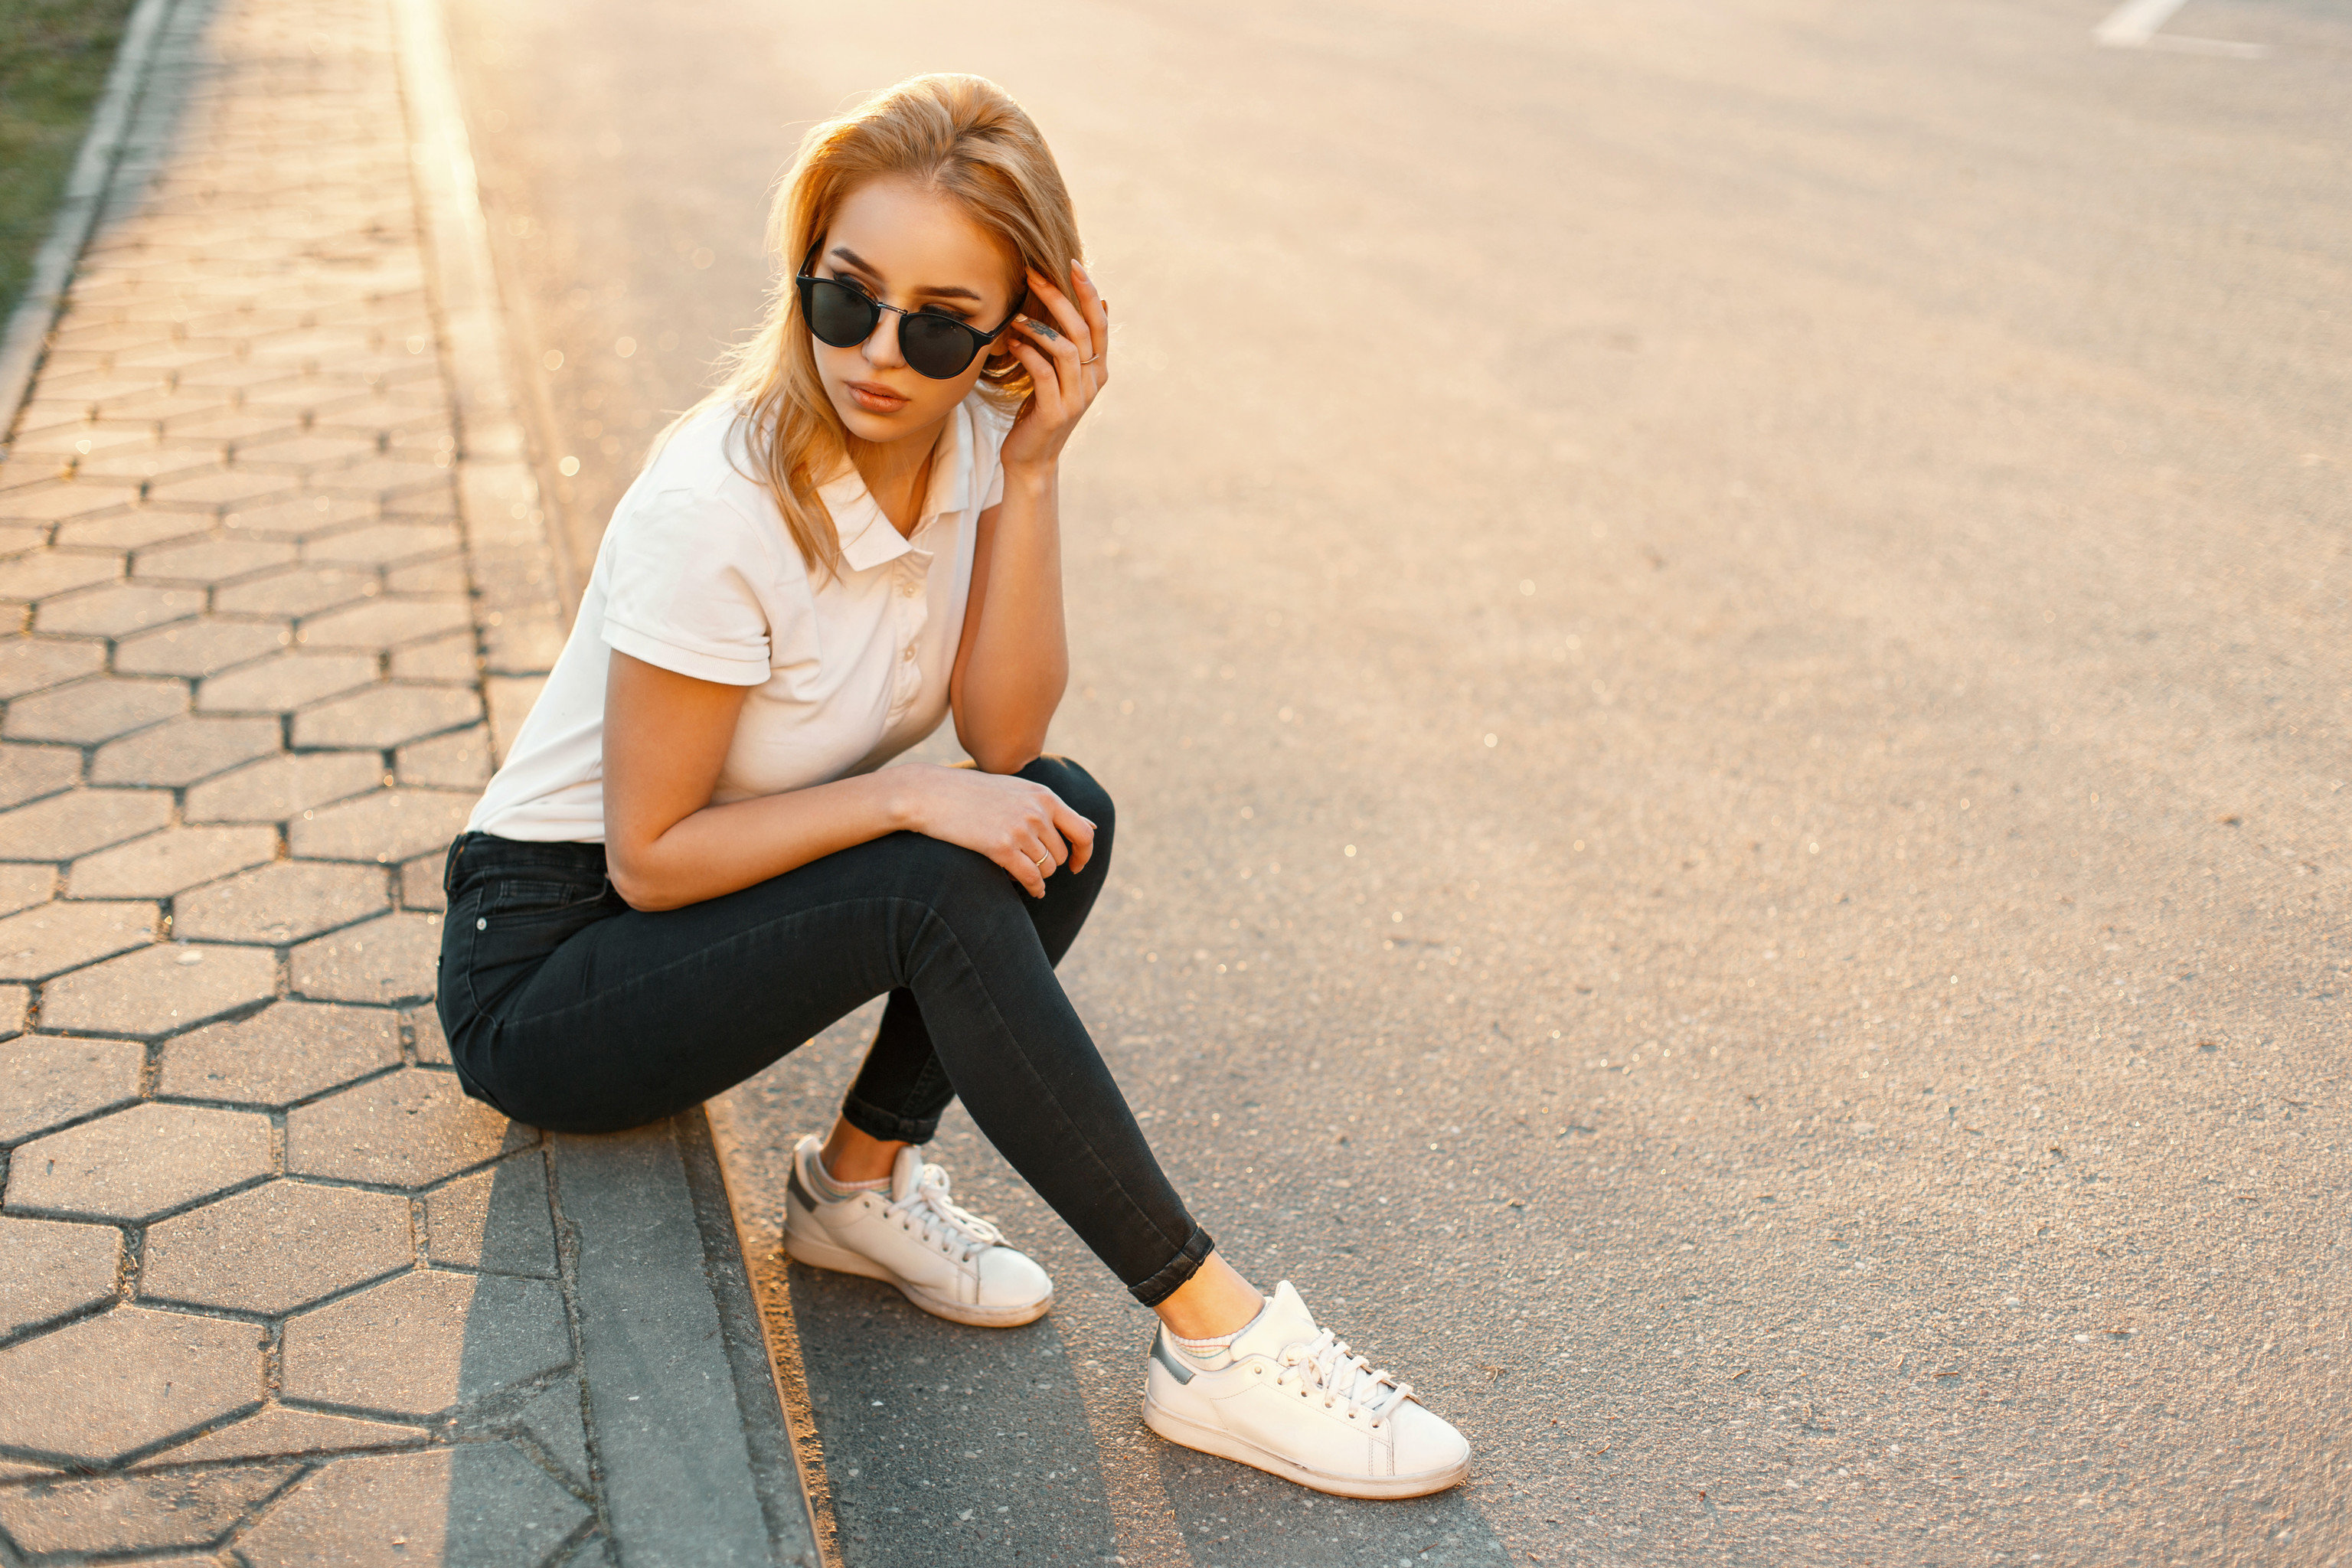 Bless farmers essence 21 BEST White Sneakers for Women That Go With Everything | Jetsetter